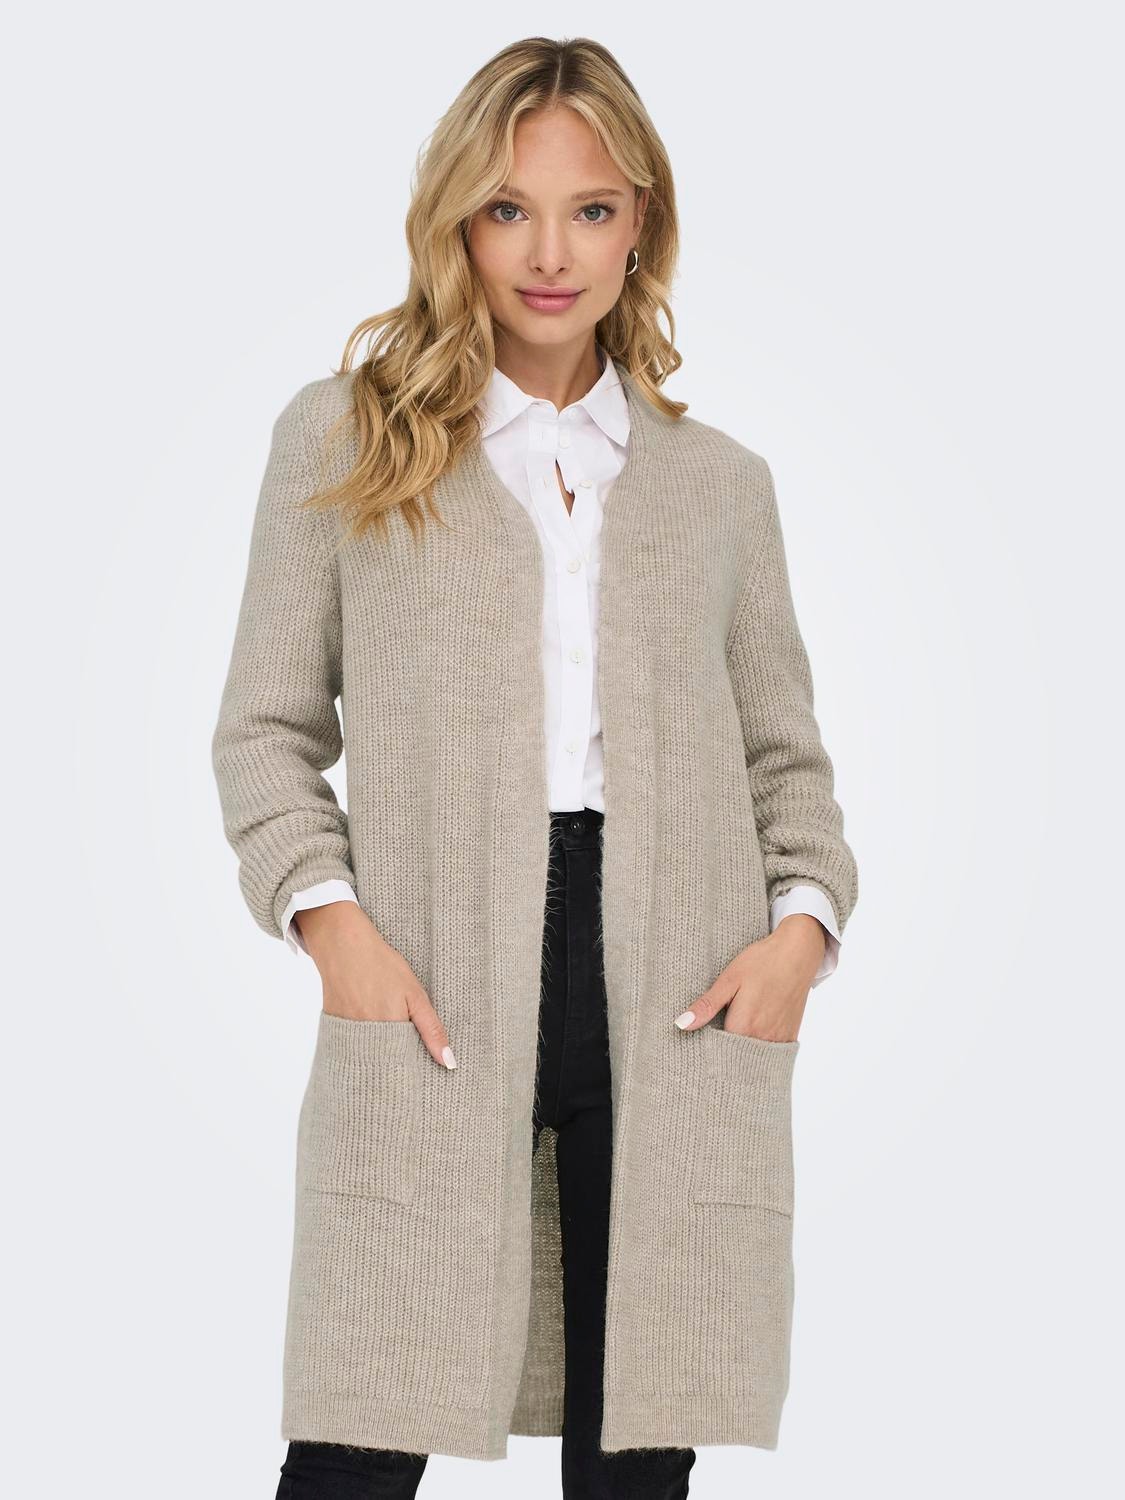 ONLY long knit cardigan with pockets  -Whitecap Gray - 15179815